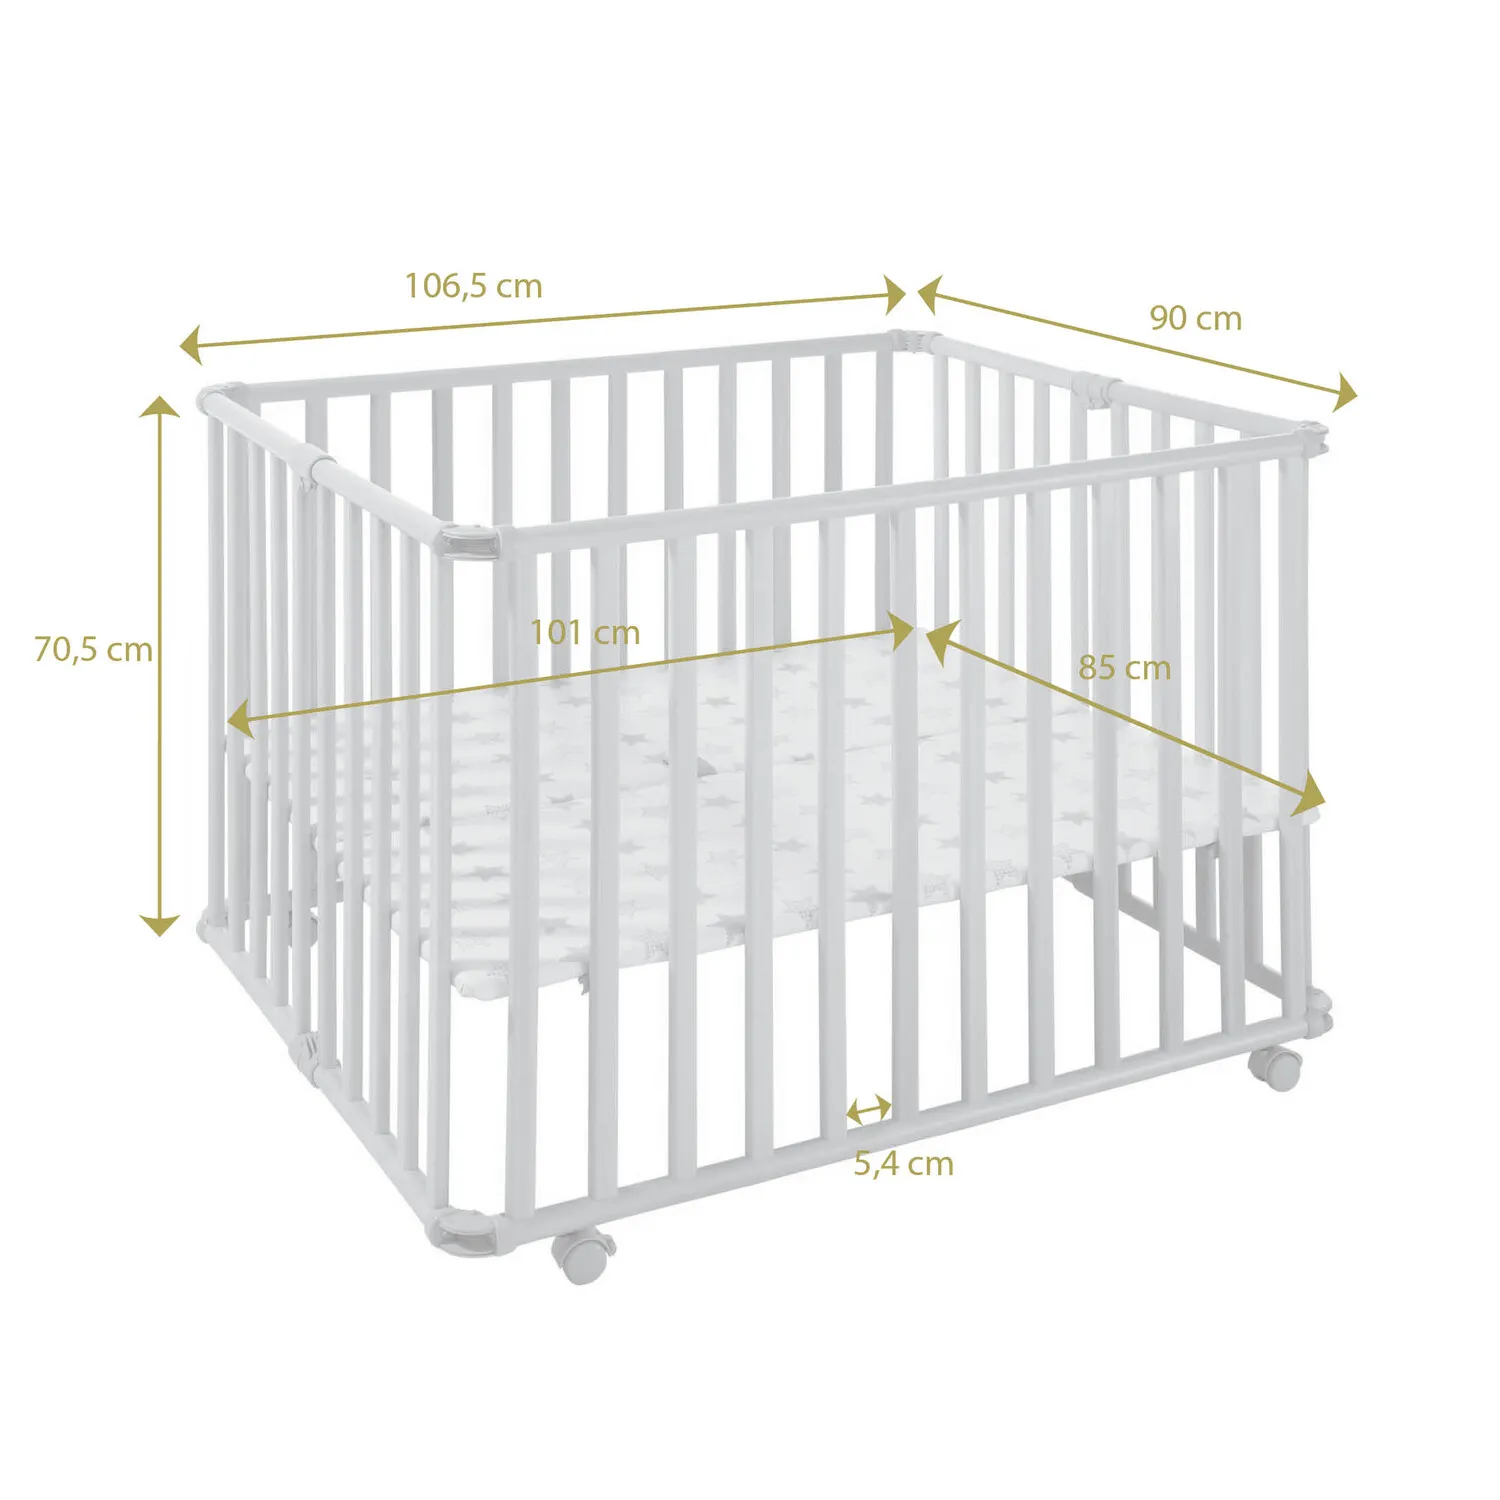 Playpen Ameli, 101 x 85 cm, foldable and with wheels